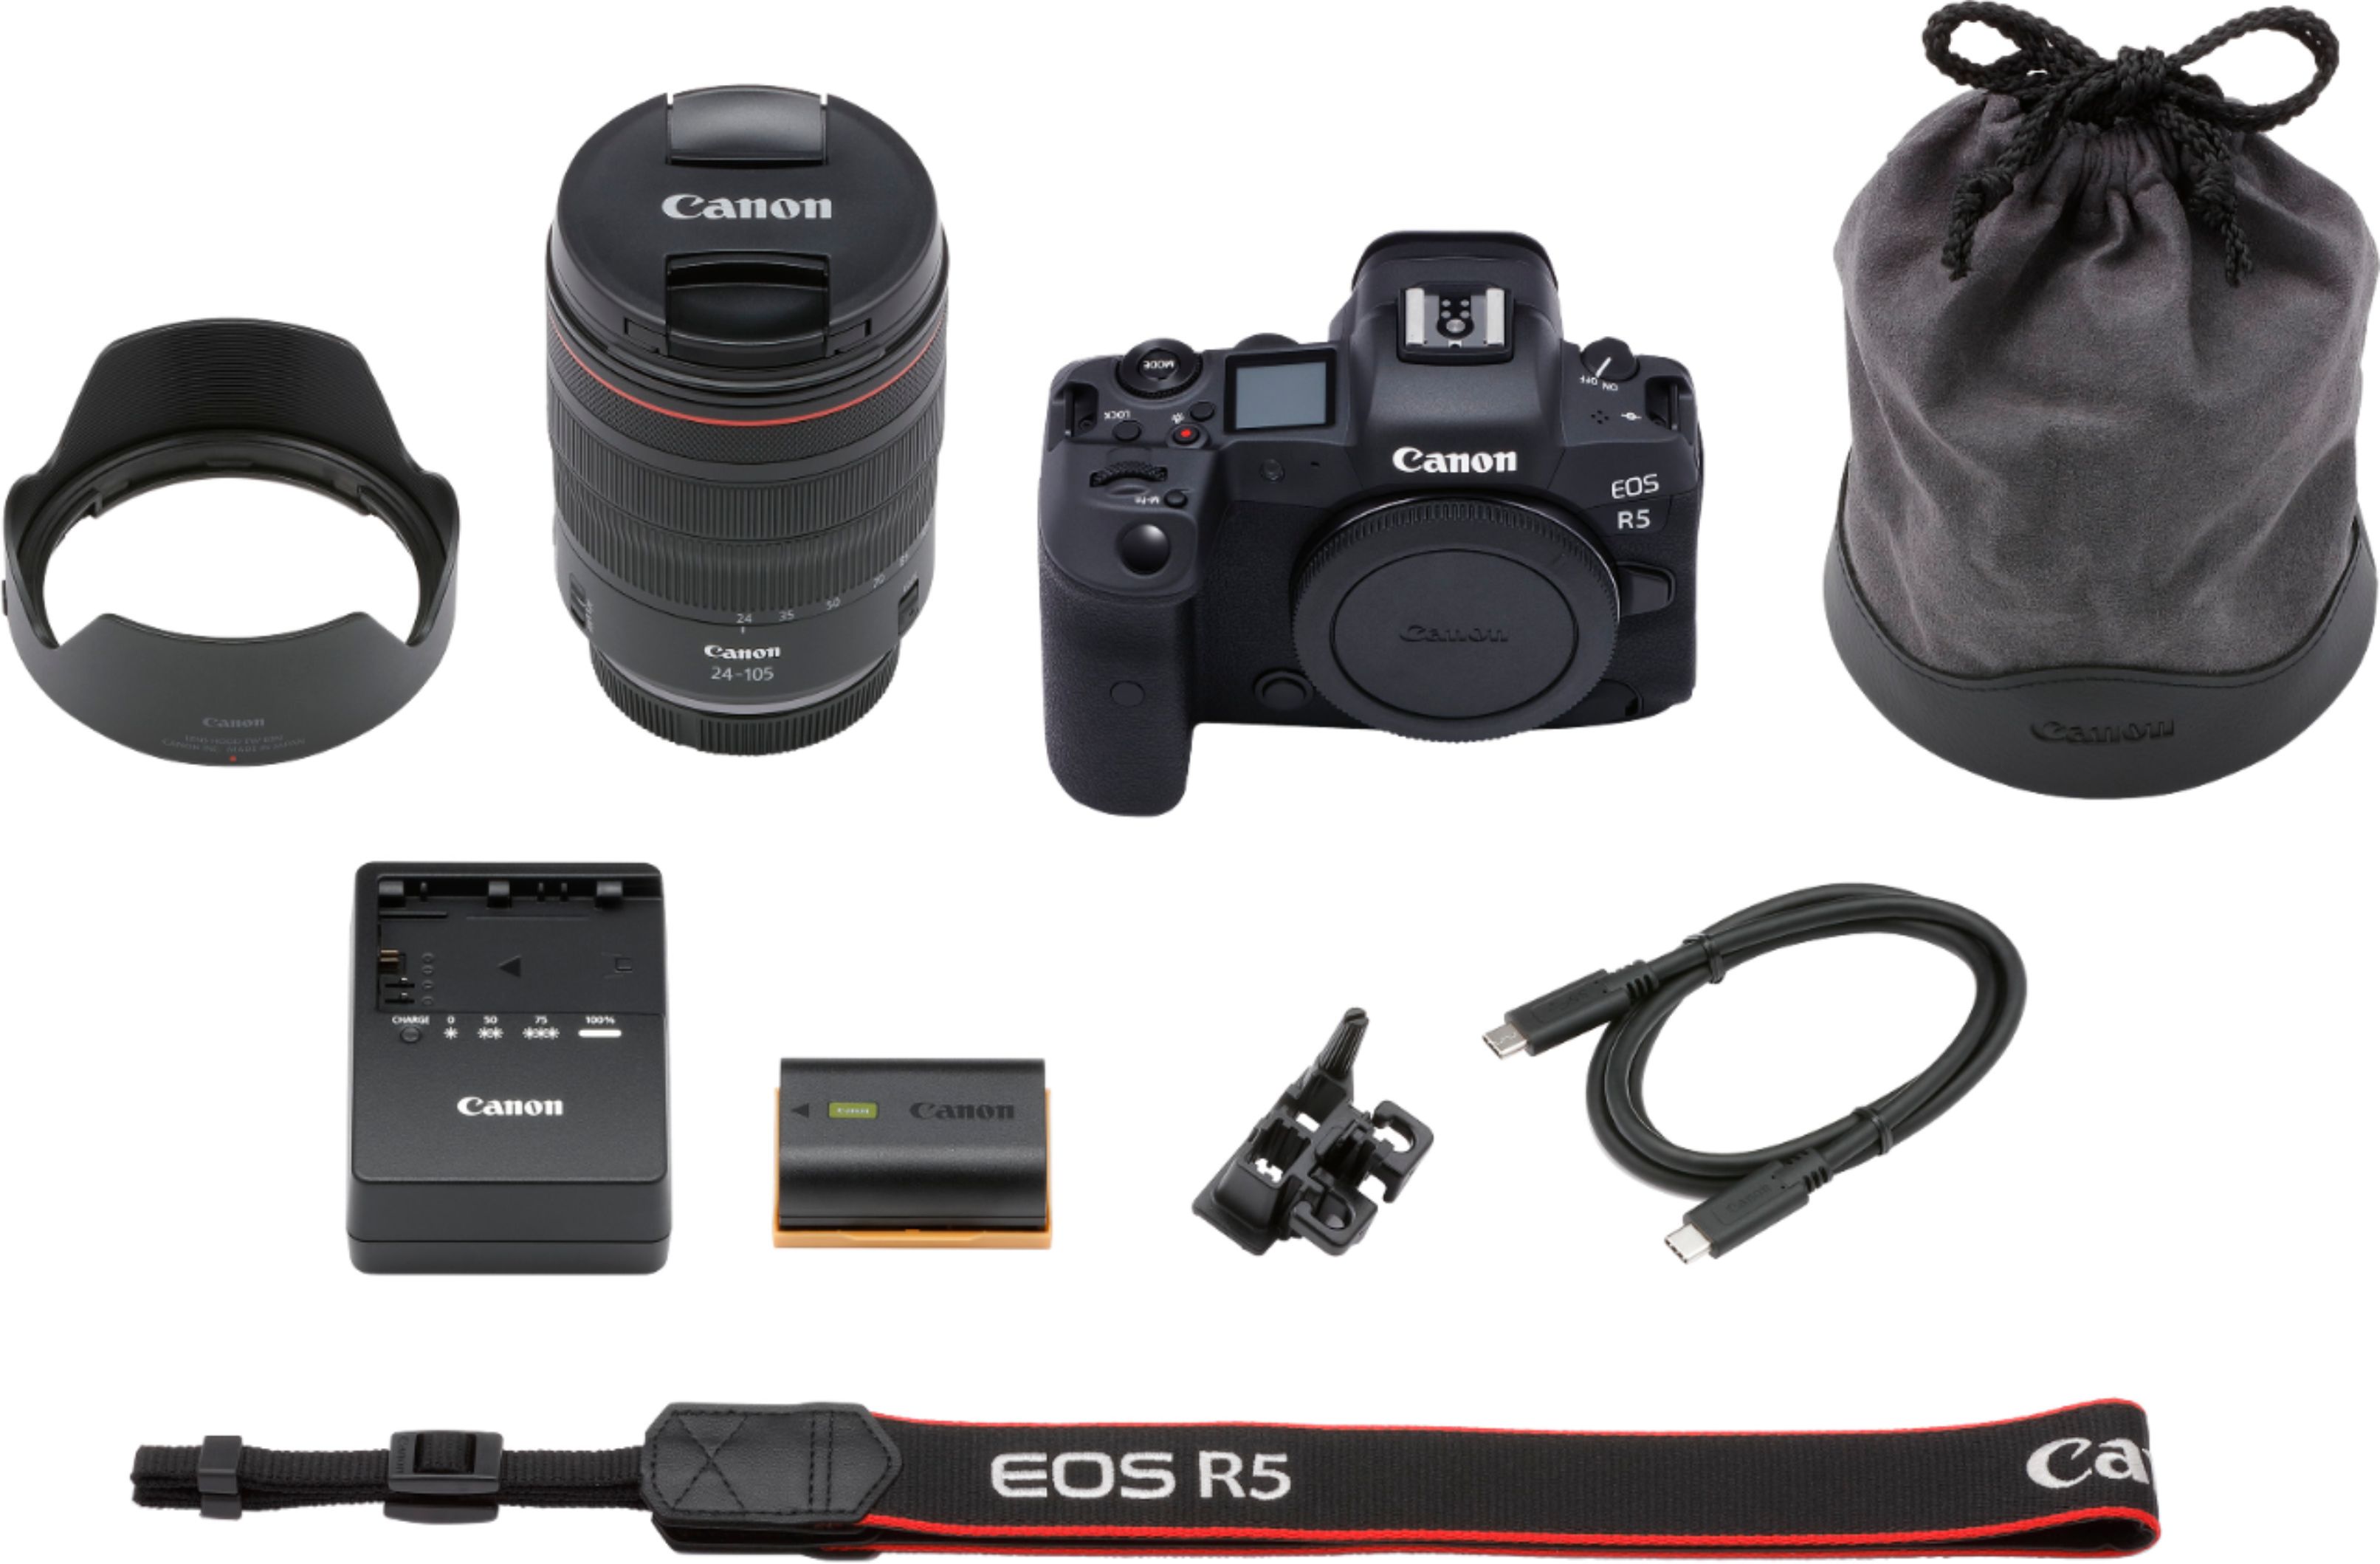 Canon EOS R5 Mirrorless Camera with RF 24-105mm f/4L IS USM Lens Black  4147C013 - Best Buy